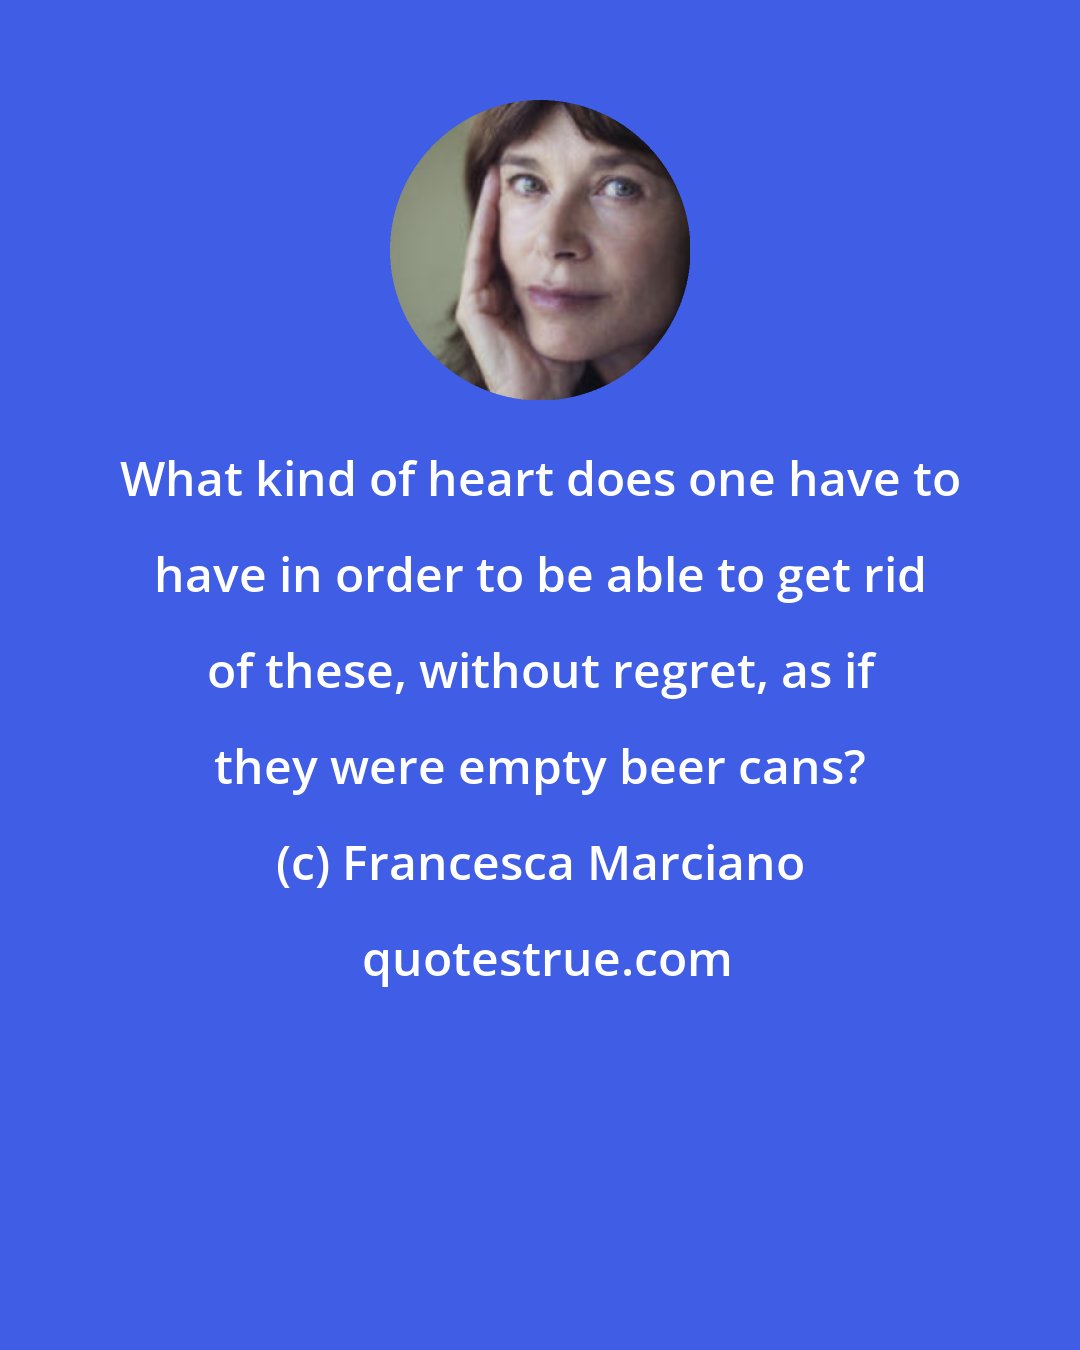 Francesca Marciano: What kind of heart does one have to have in order to be able to get rid of these, without regret, as if they were empty beer cans?